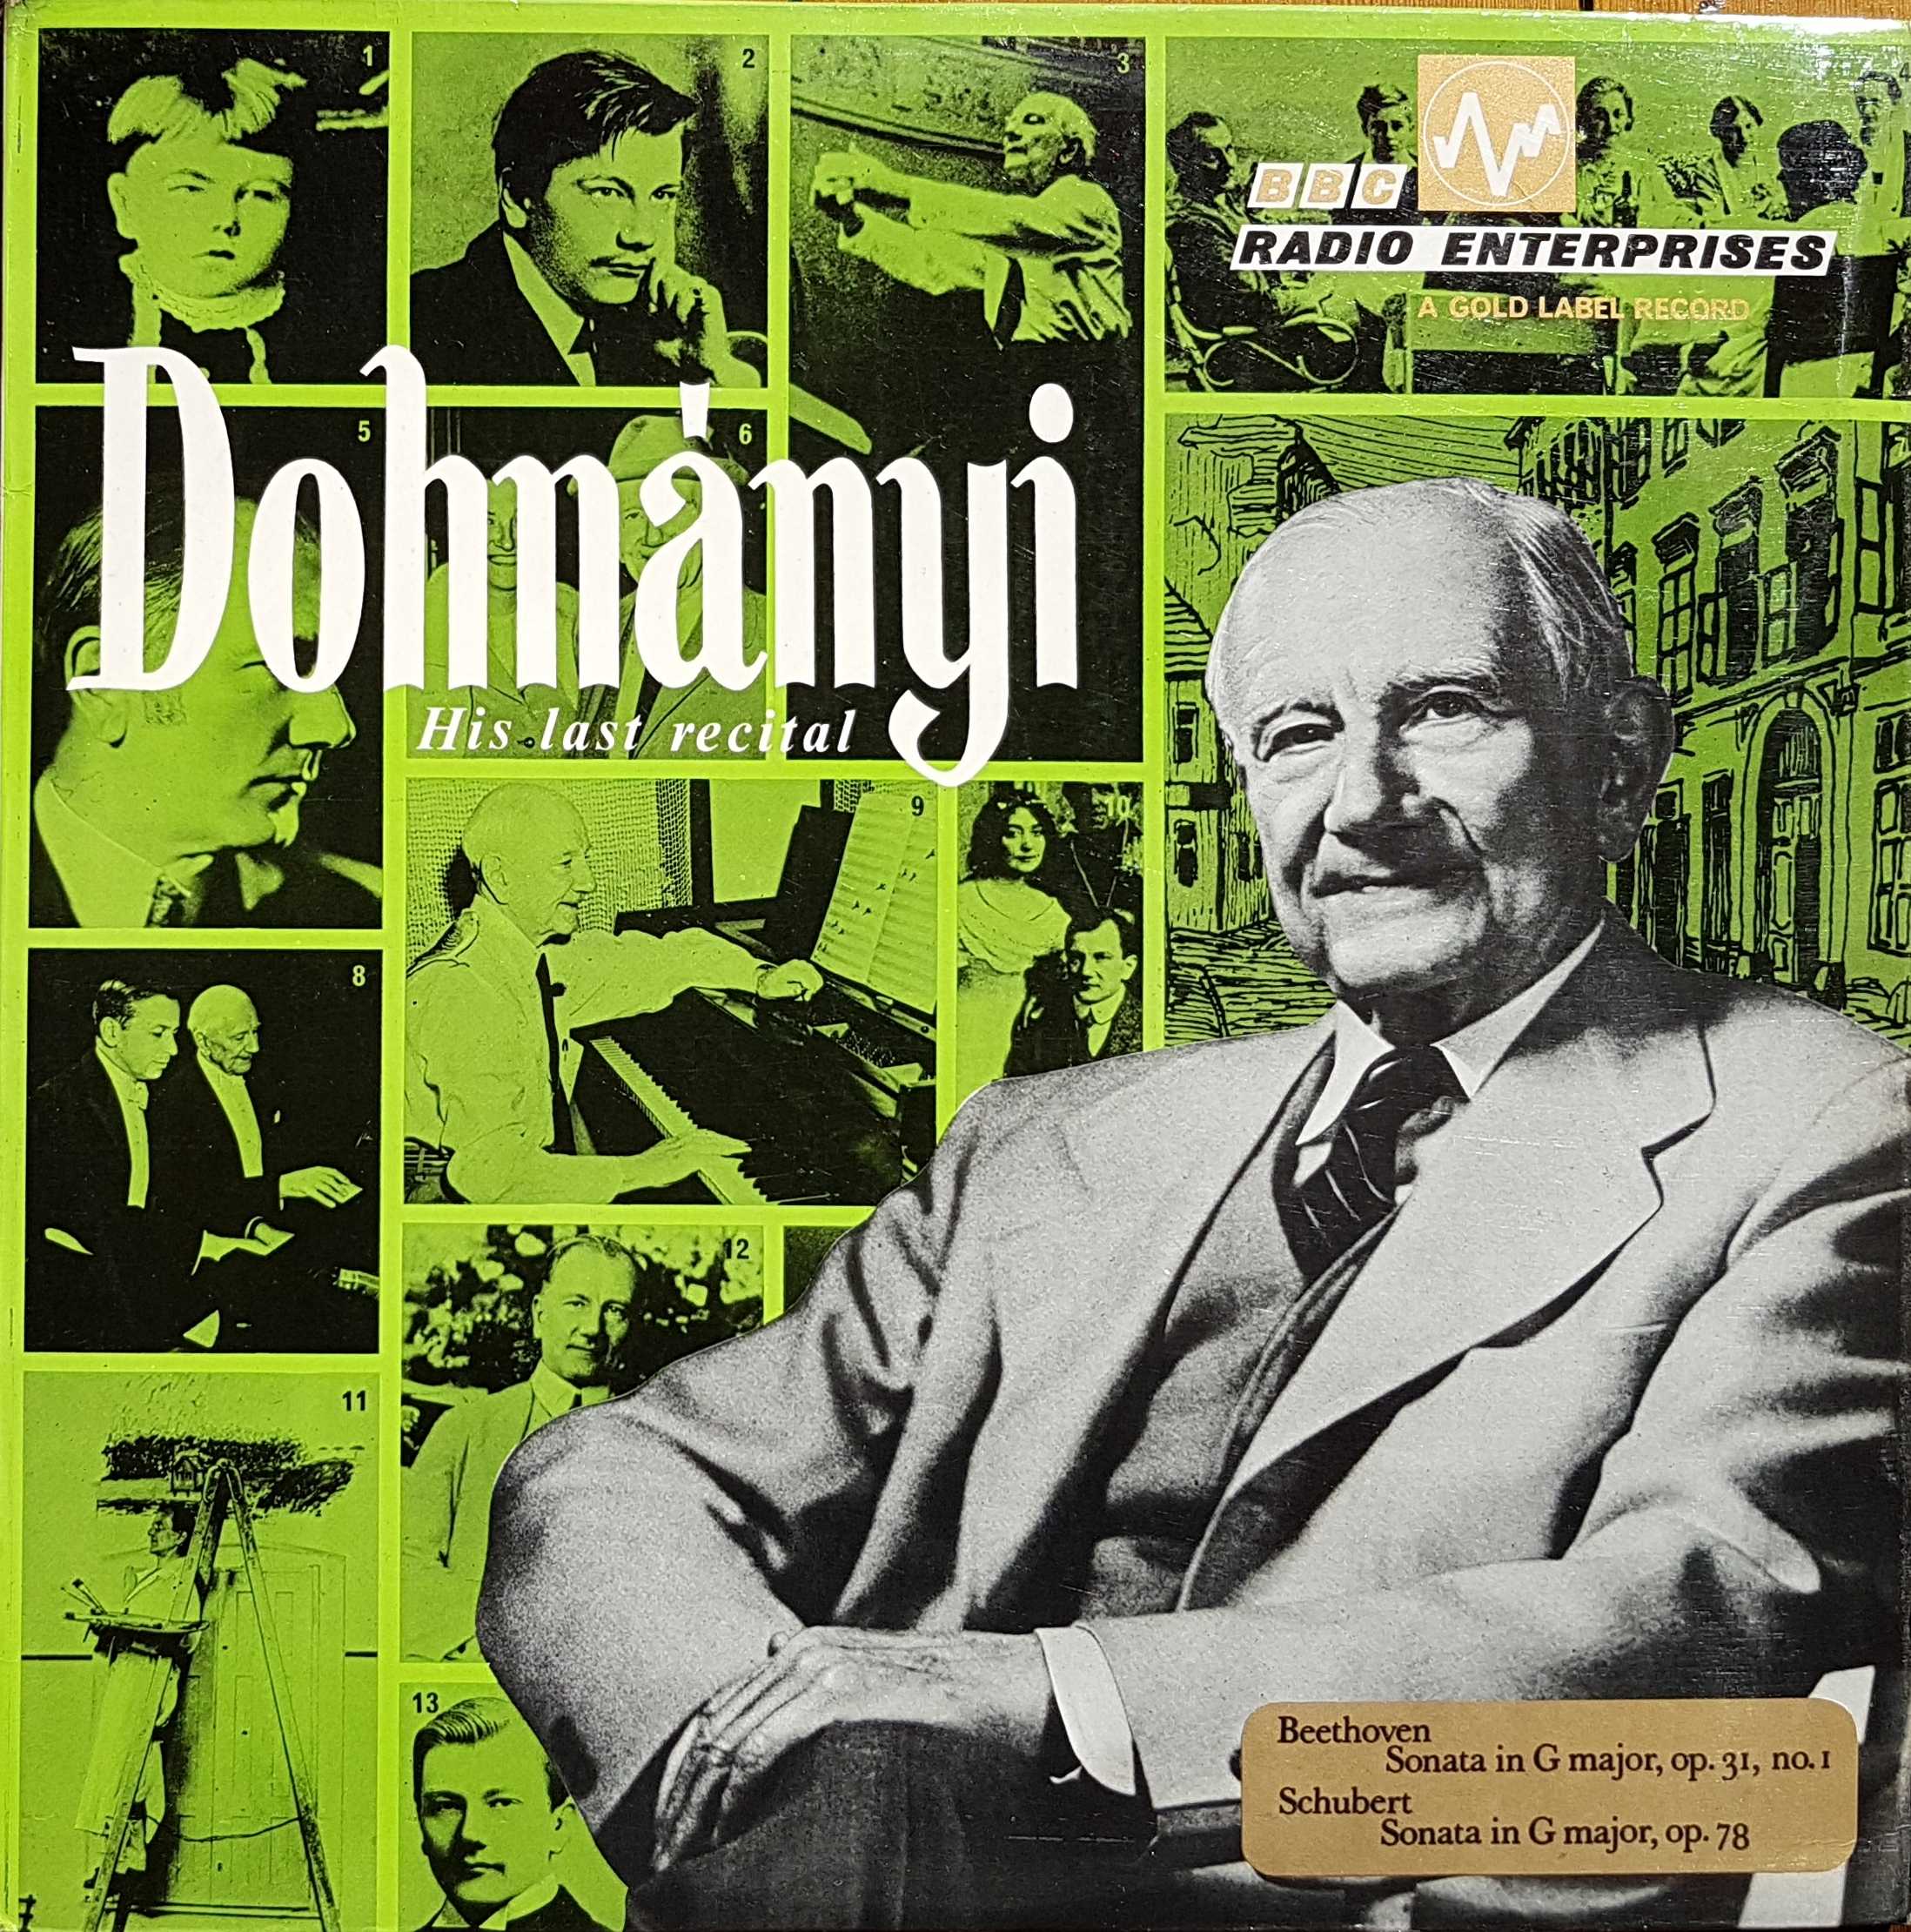 Picture of REGL 4 Dohnanyi - his last recital by artist Dohnanyi from the BBC albums - Records and Tapes library